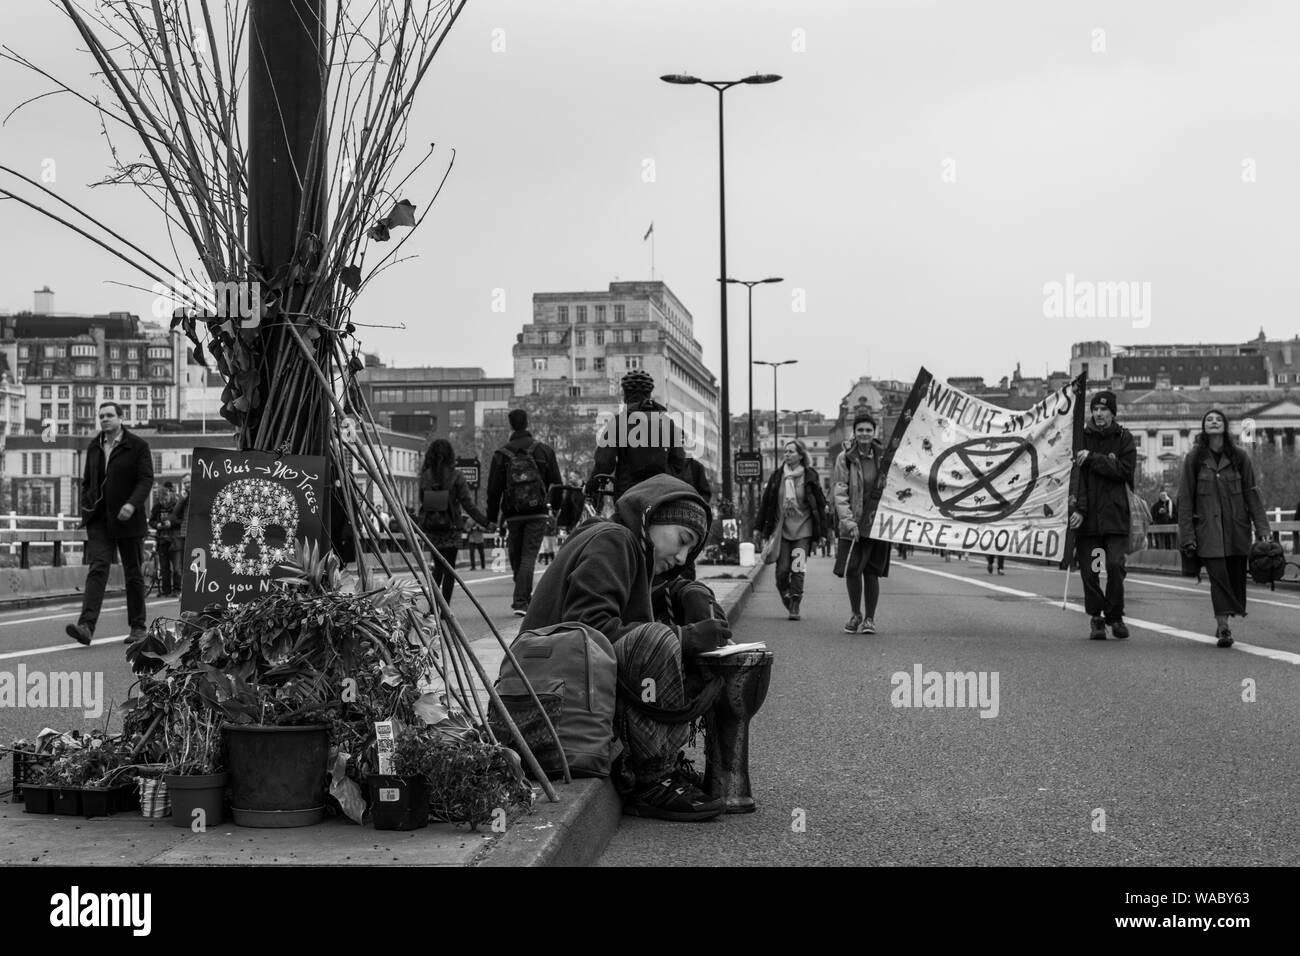 Save mother Earth protests in London streets in black in white Stock Photo